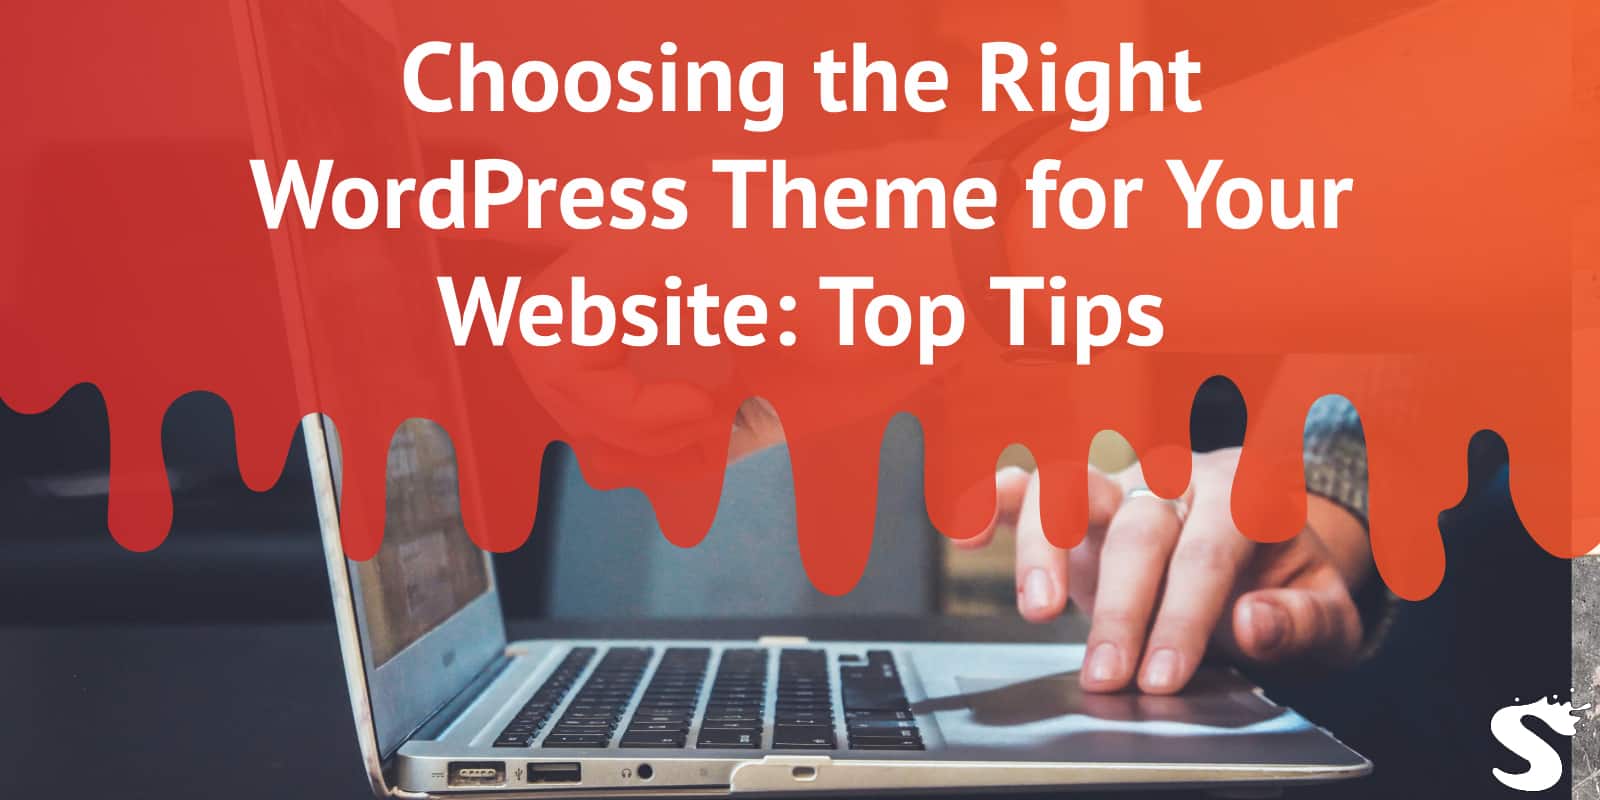 Choosing the Right WordPress Theme for Your Website: Top Tips